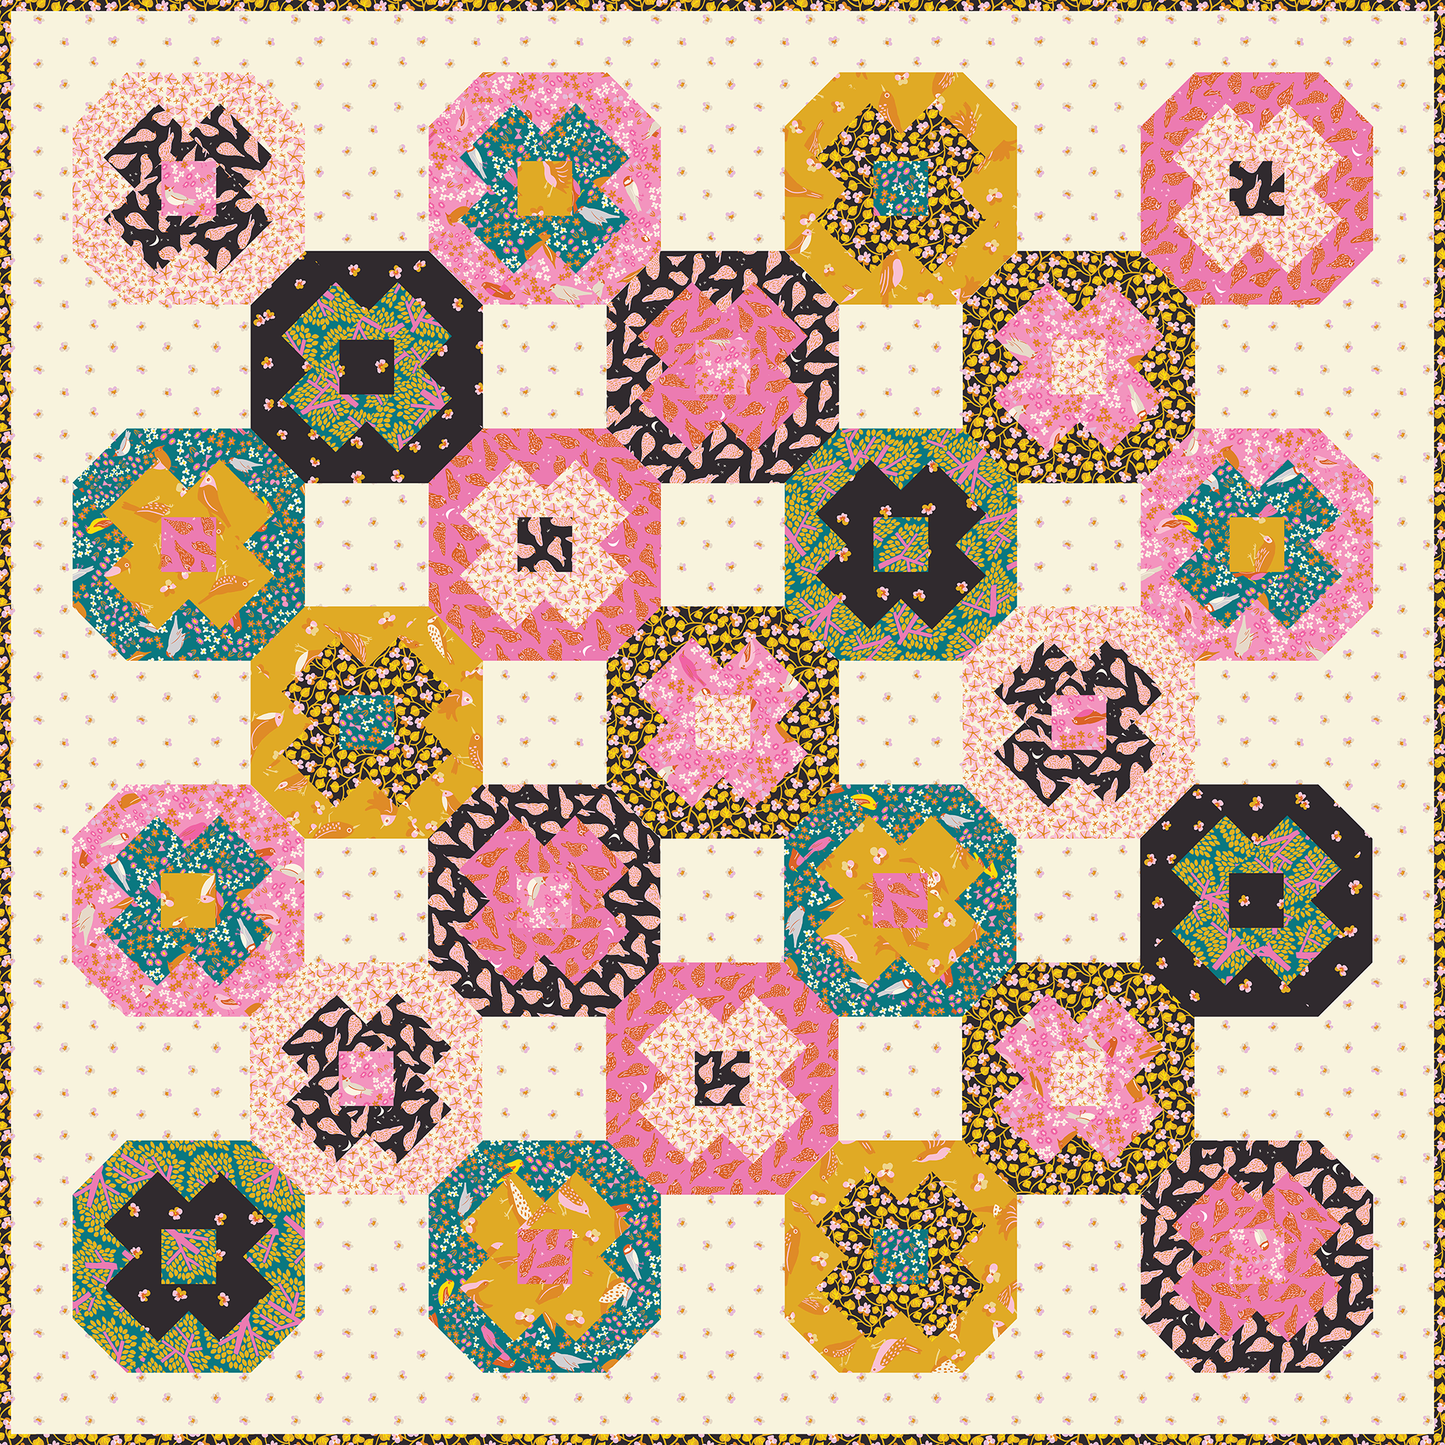 Bird is the Word by Kimberly Kight : Churn Dot Quilt Kit (Estimated Arrival Dec.2024)